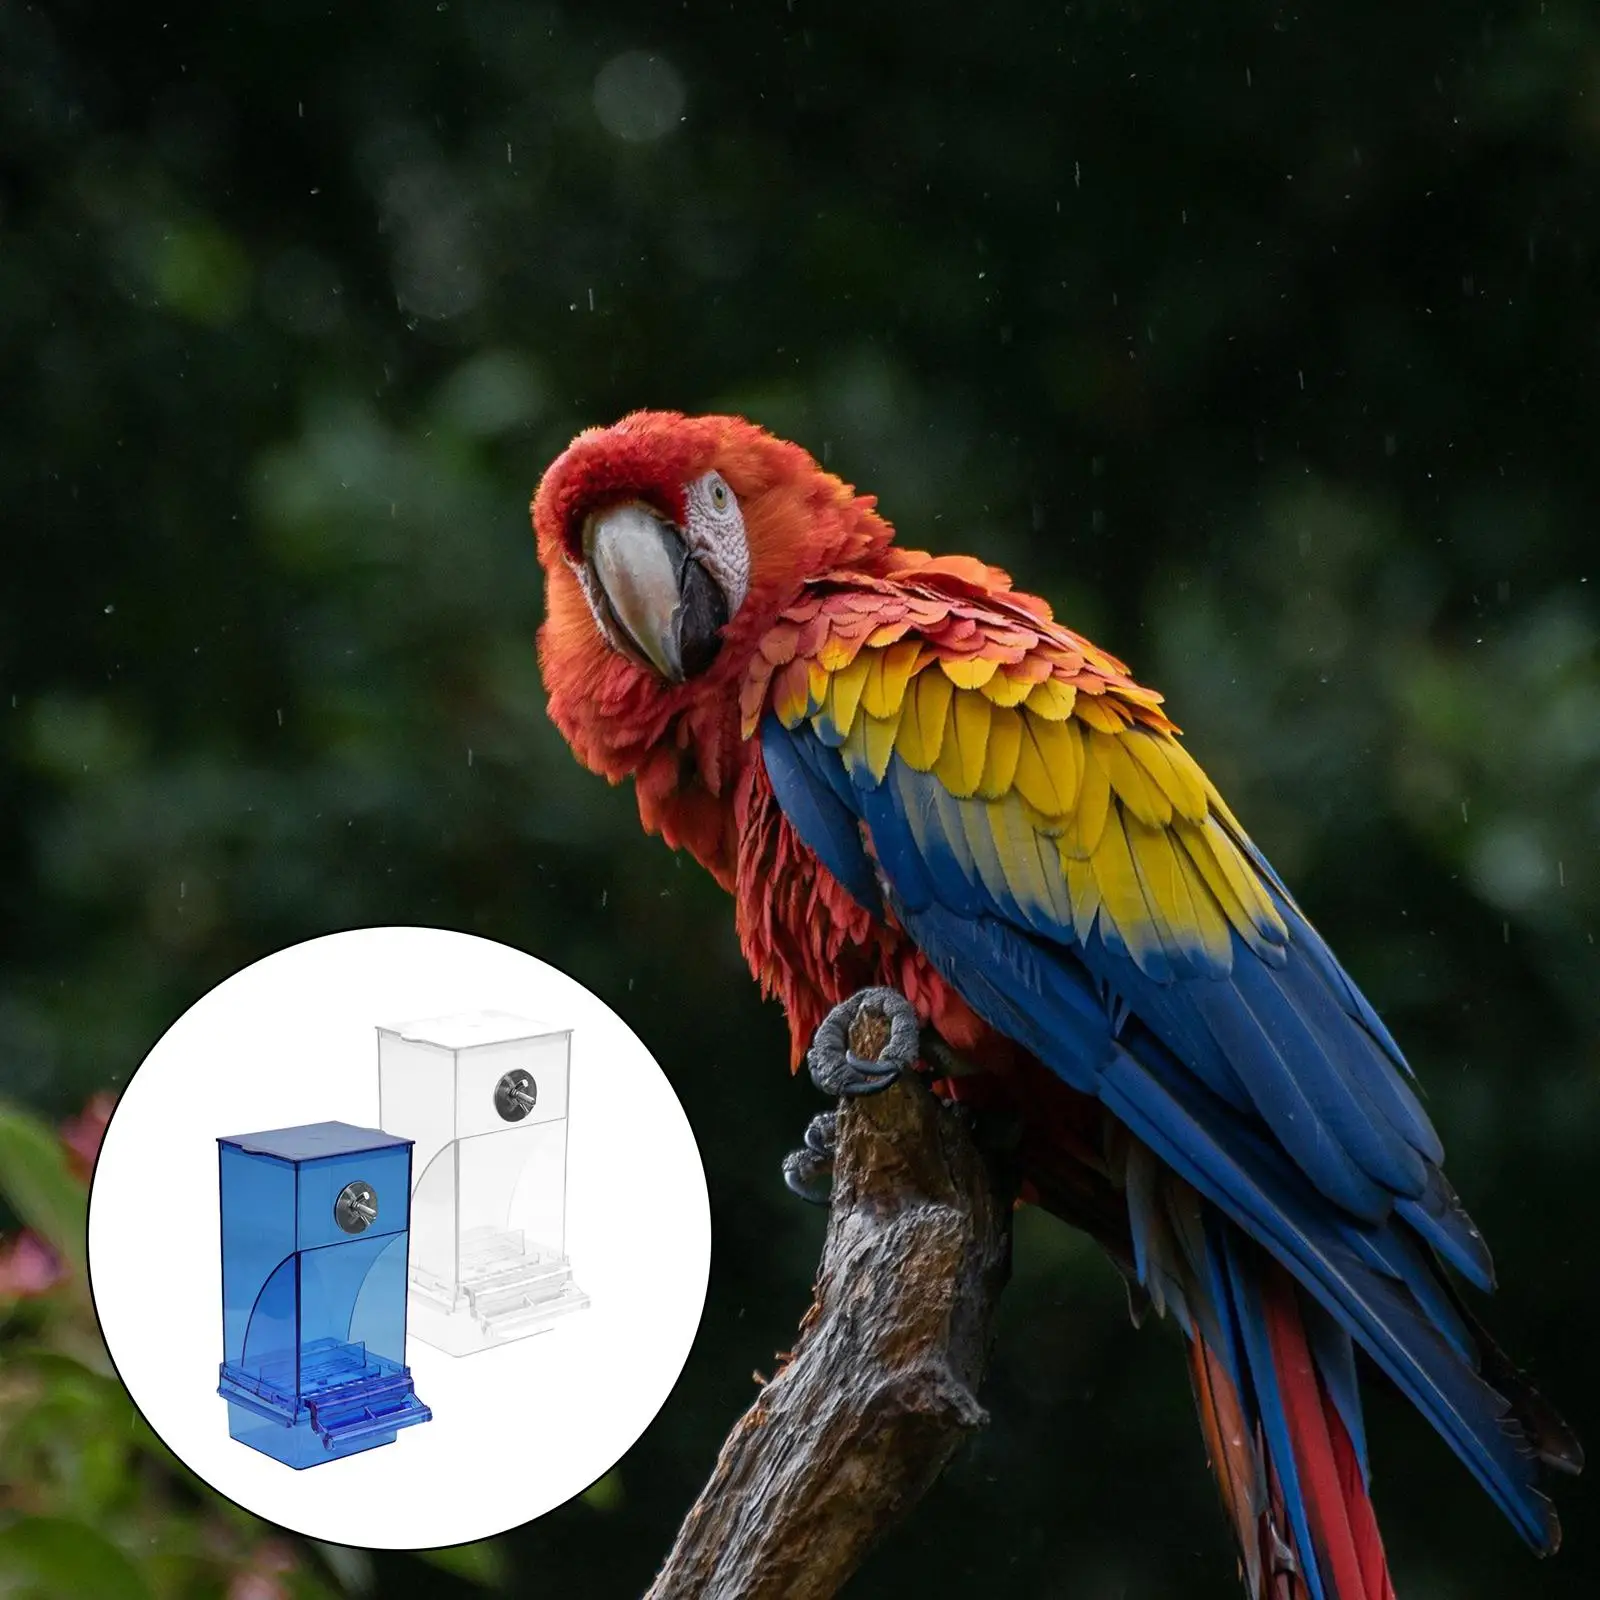 Automatic Bird Feeder No-Mess Hanging Pet Feeder Seed Food Container Perch Cage Accessories for Parrots Budgie Cockatiel